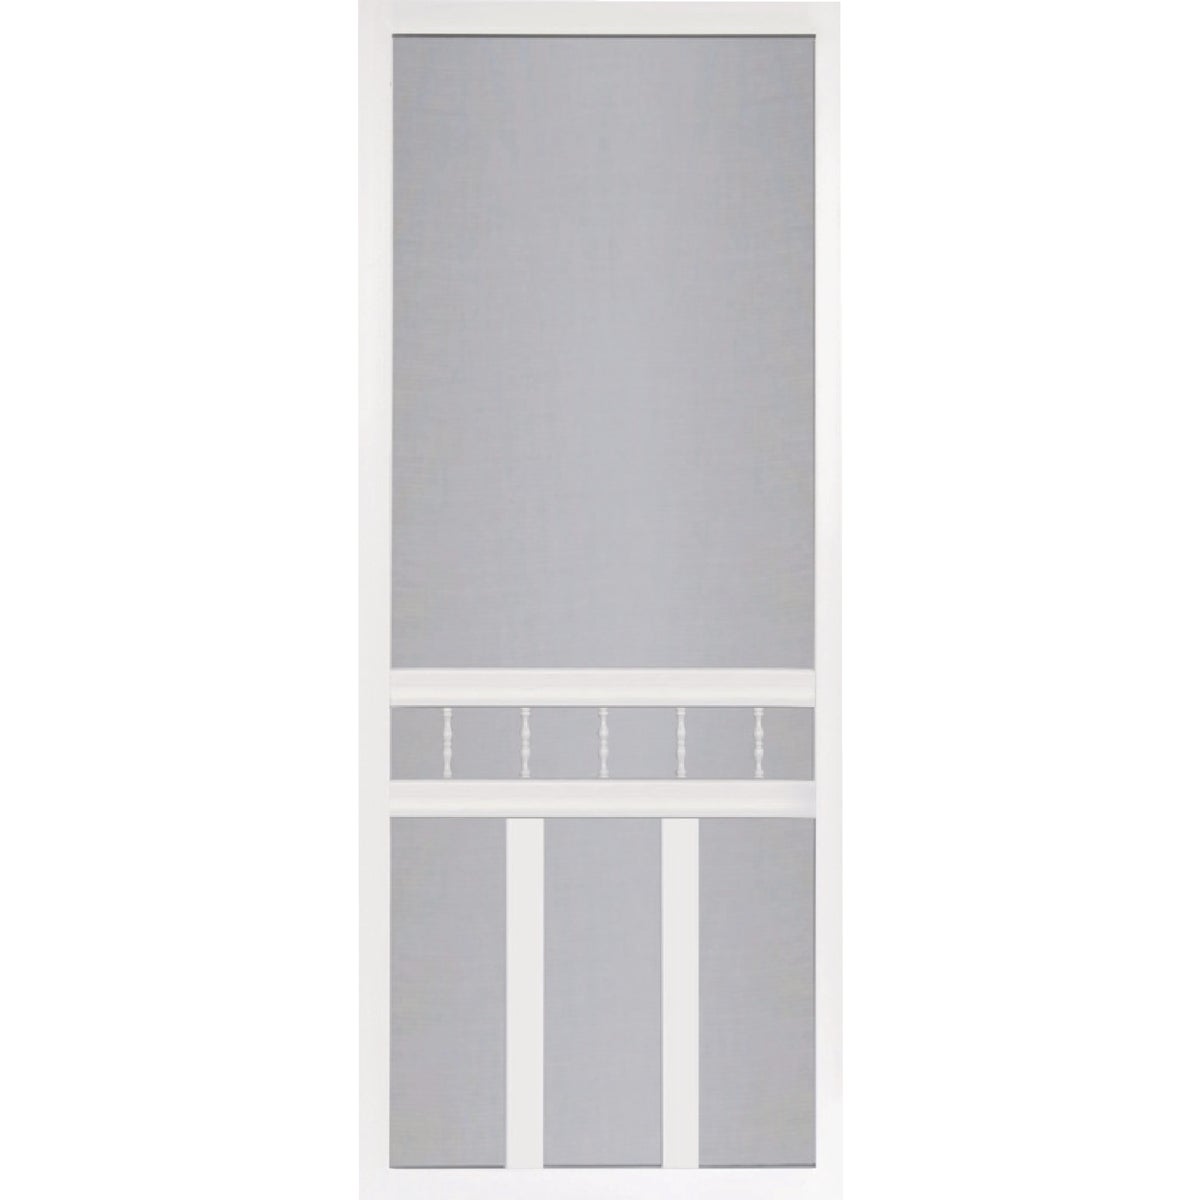 Screen Tight Waccamaw 32 In. W x 80 In. H x 1 In. Thick White Vinyl Screen Door